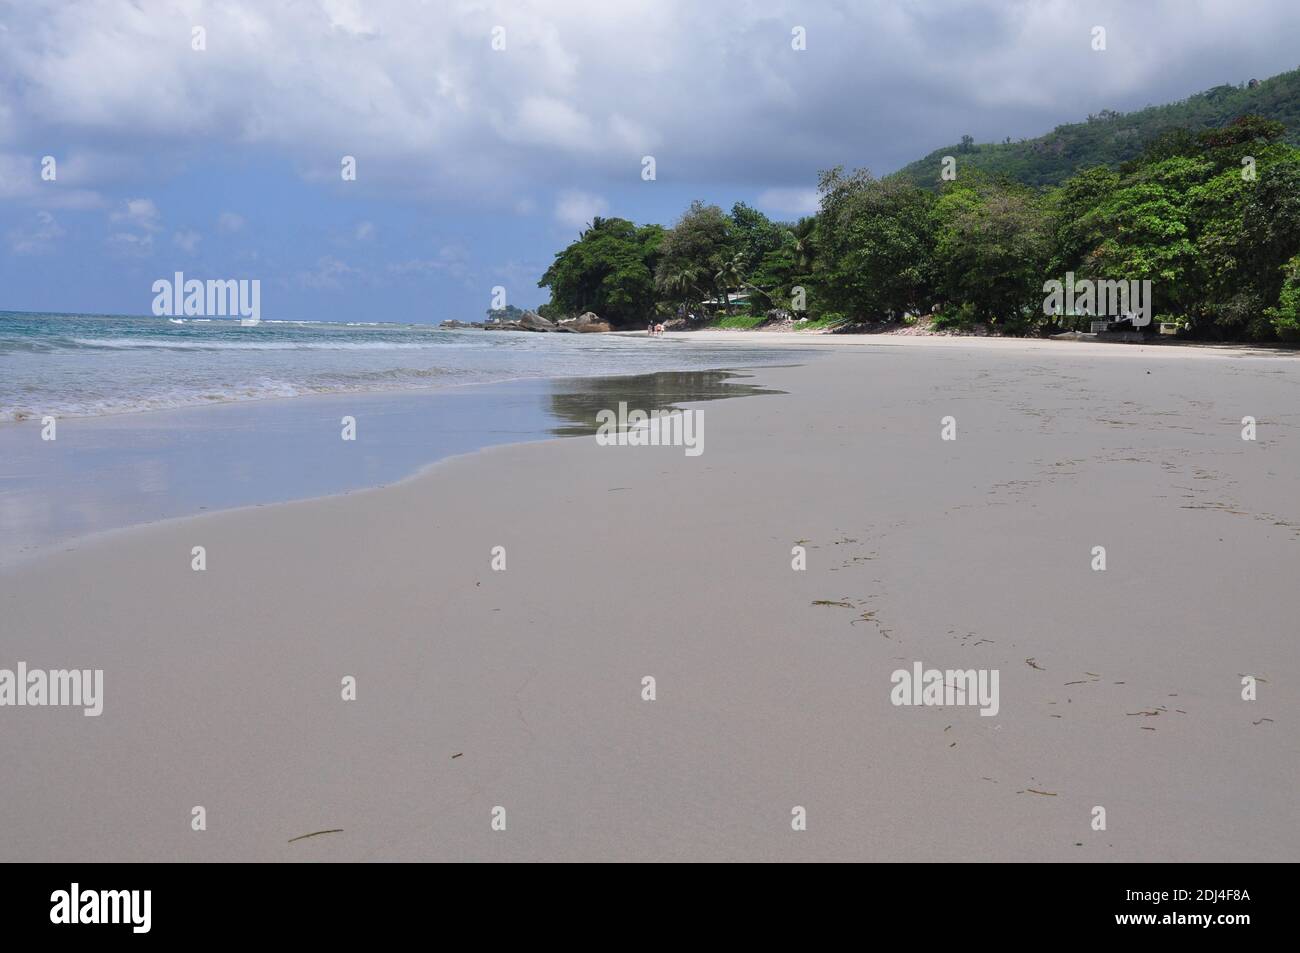 Beau vallon beach. Mahé is the largest island in the Seychelles archipelago, in the Indian Ocean off East Africa. Truly heaven on earth. Stock Photo